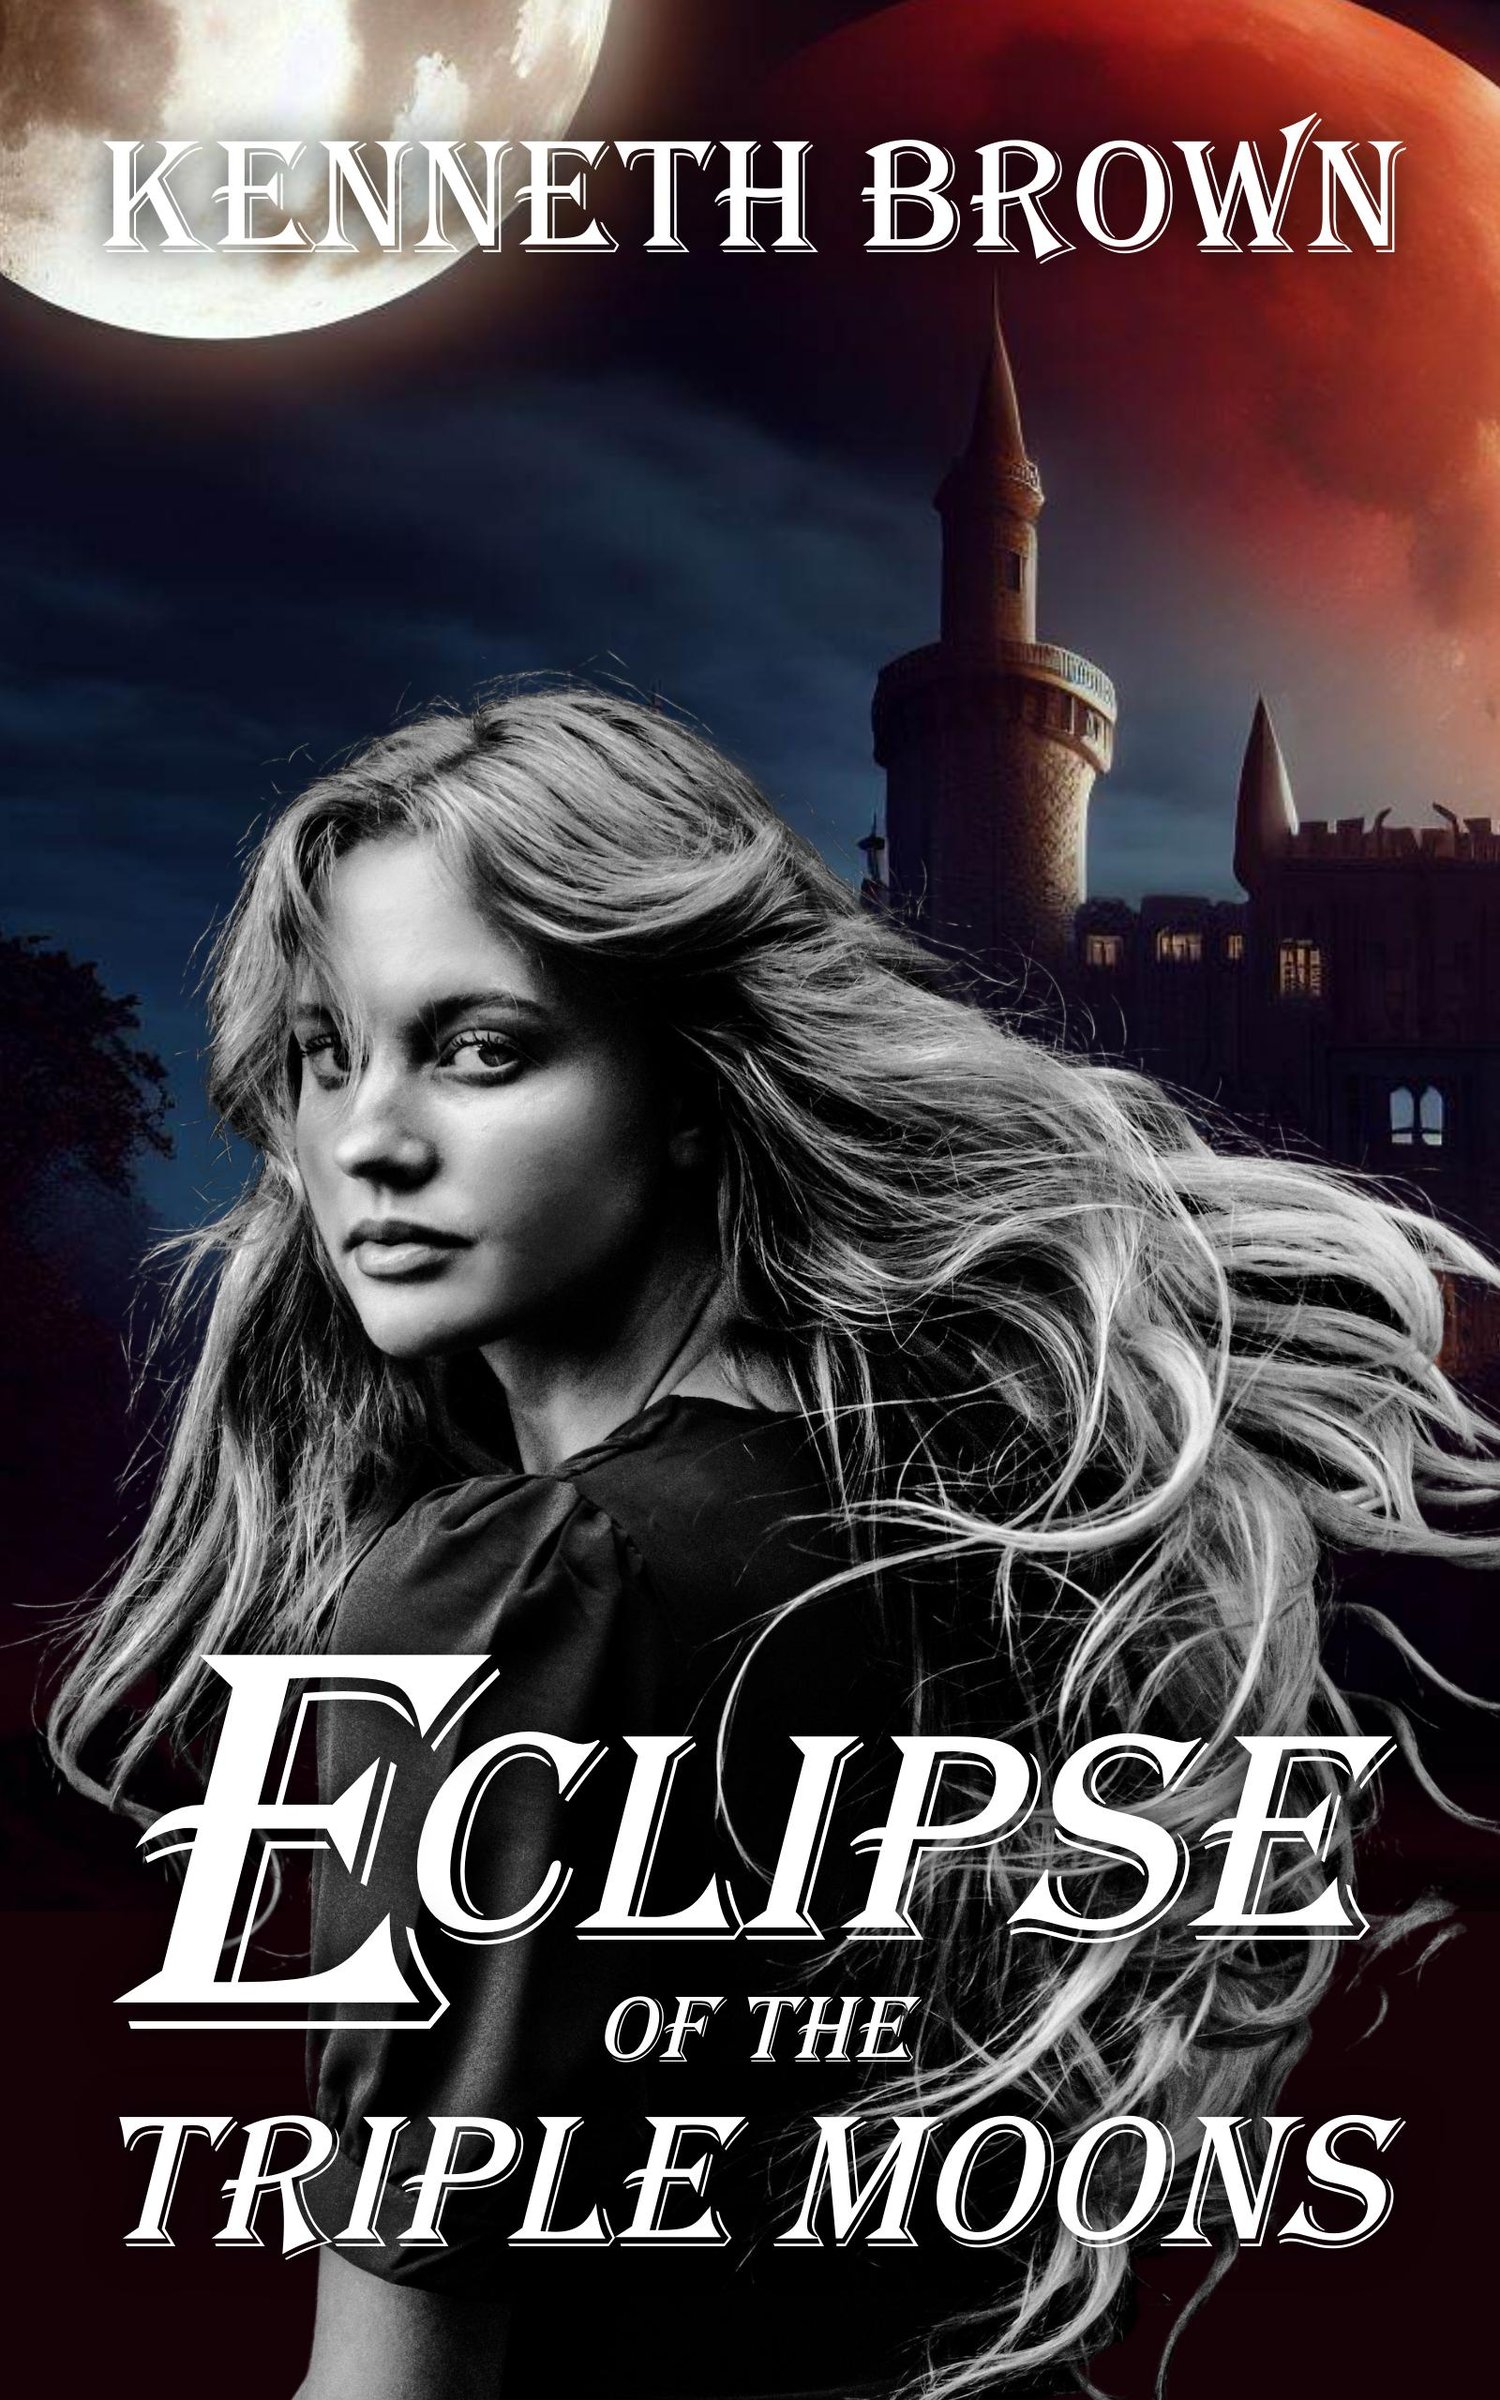 New cover for Eclipse of the Triple Moons = Book one in the Mountain King Series.